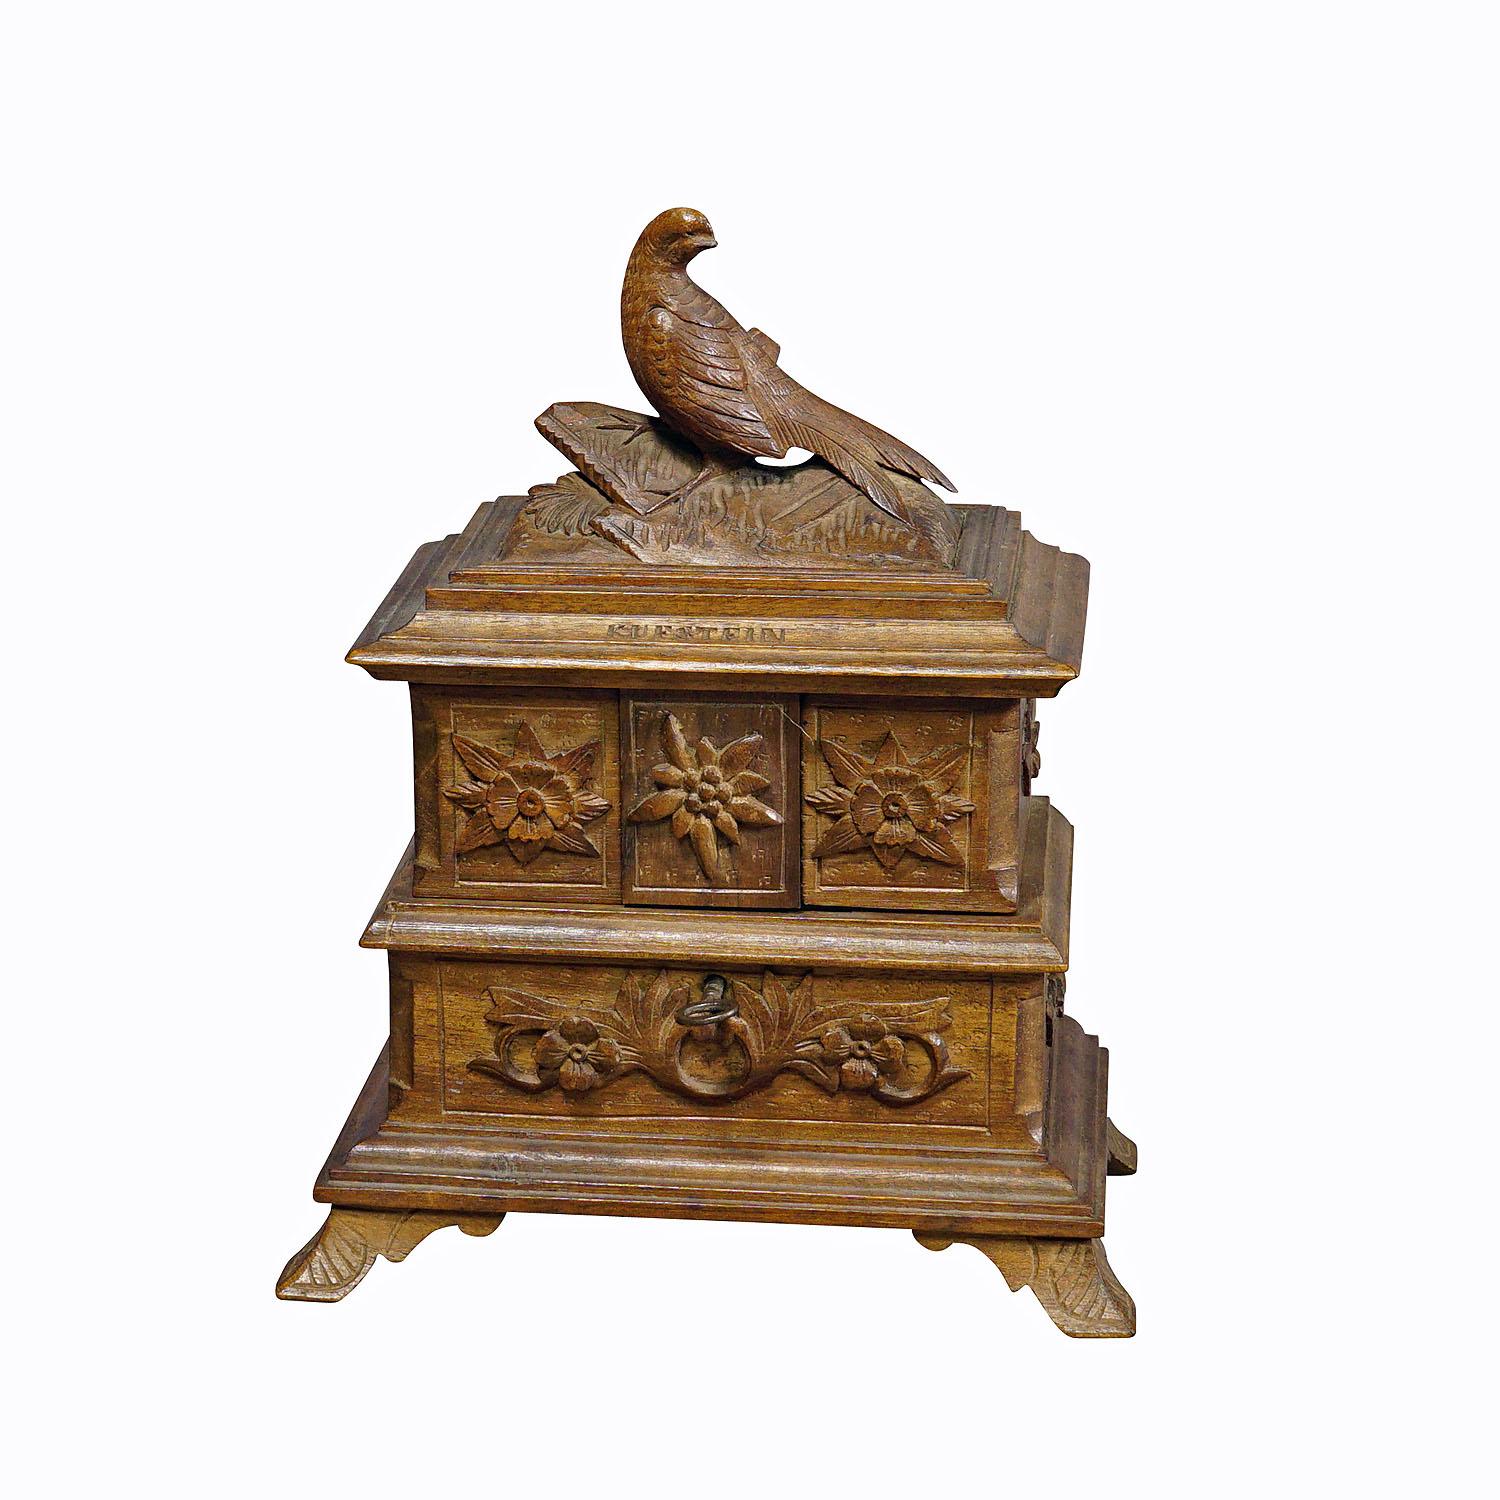 Antique Wooden Carved Edelweis Jewelry Box with Bird, Brienz ca 1900

A very nice antique handcarved Black Forest sewing box or jewelry box with edelweis carvings and bird on the lid. The inside is covered with blue velvet. The item is a fine